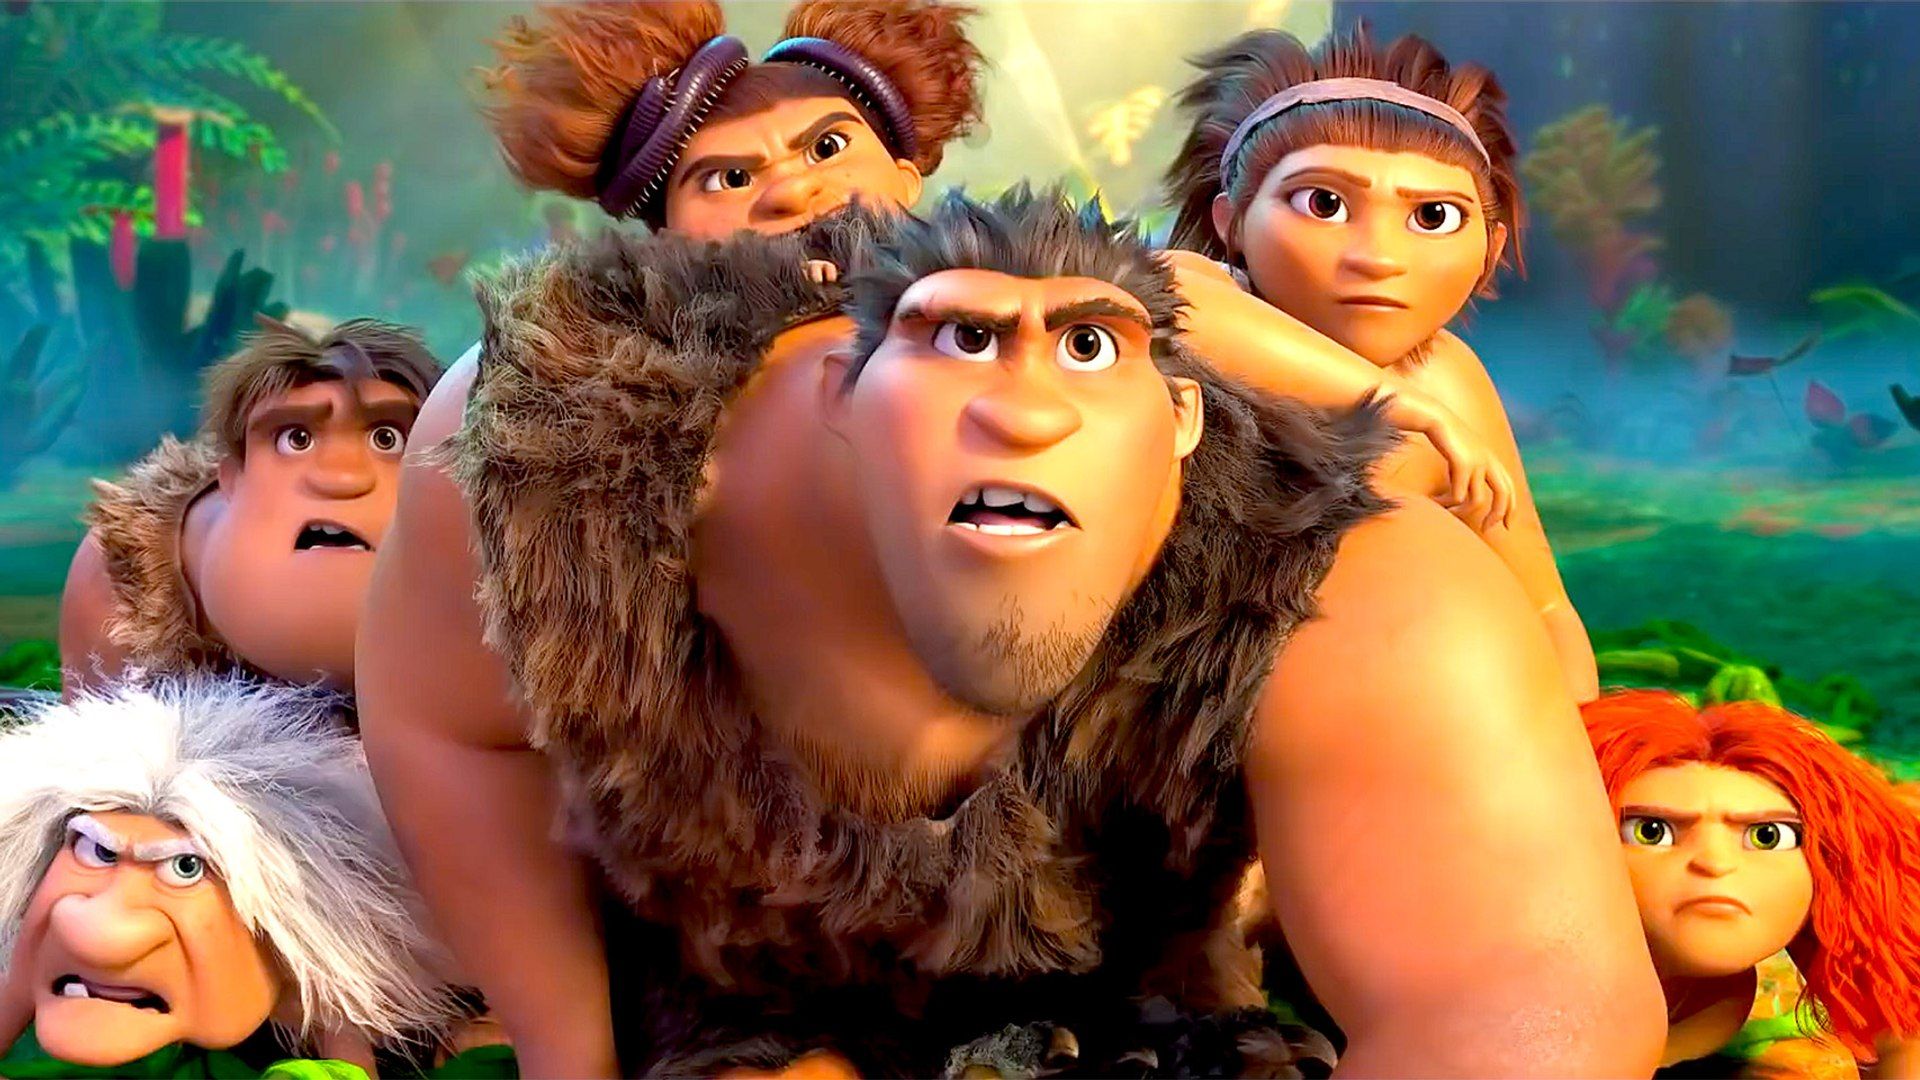 The Croods: A New Age with Nicolas Cage